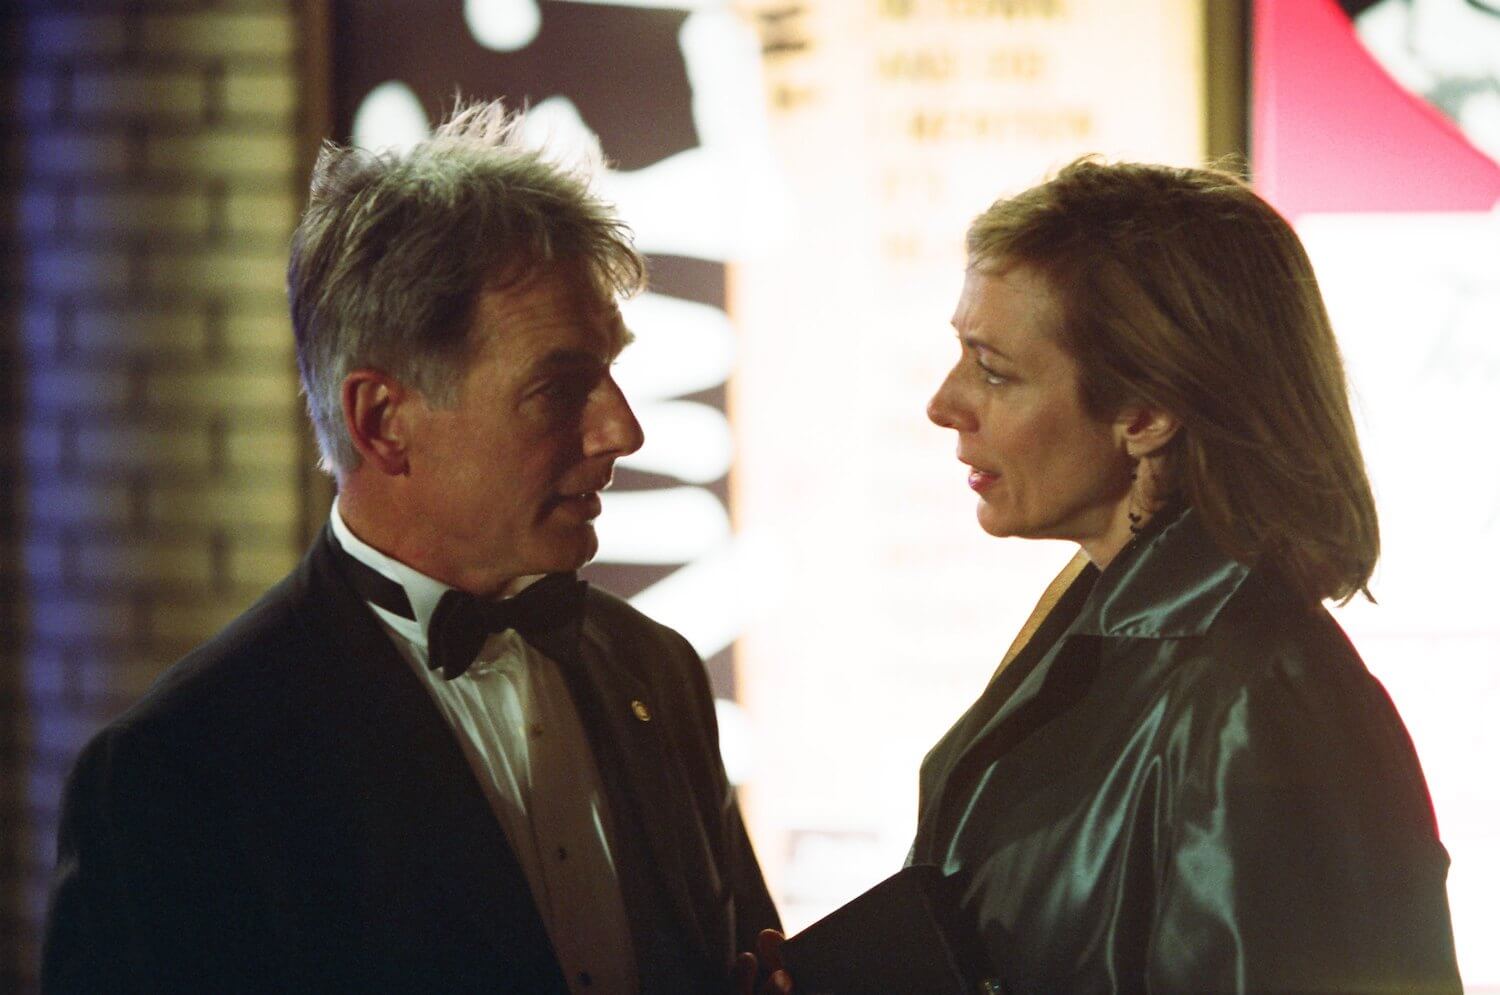 Mark Harmon as Agent Simon Donovan and Allison Janney as Claudia Jean 'C.J.' Cregg act out a scene in 'The West Wing'